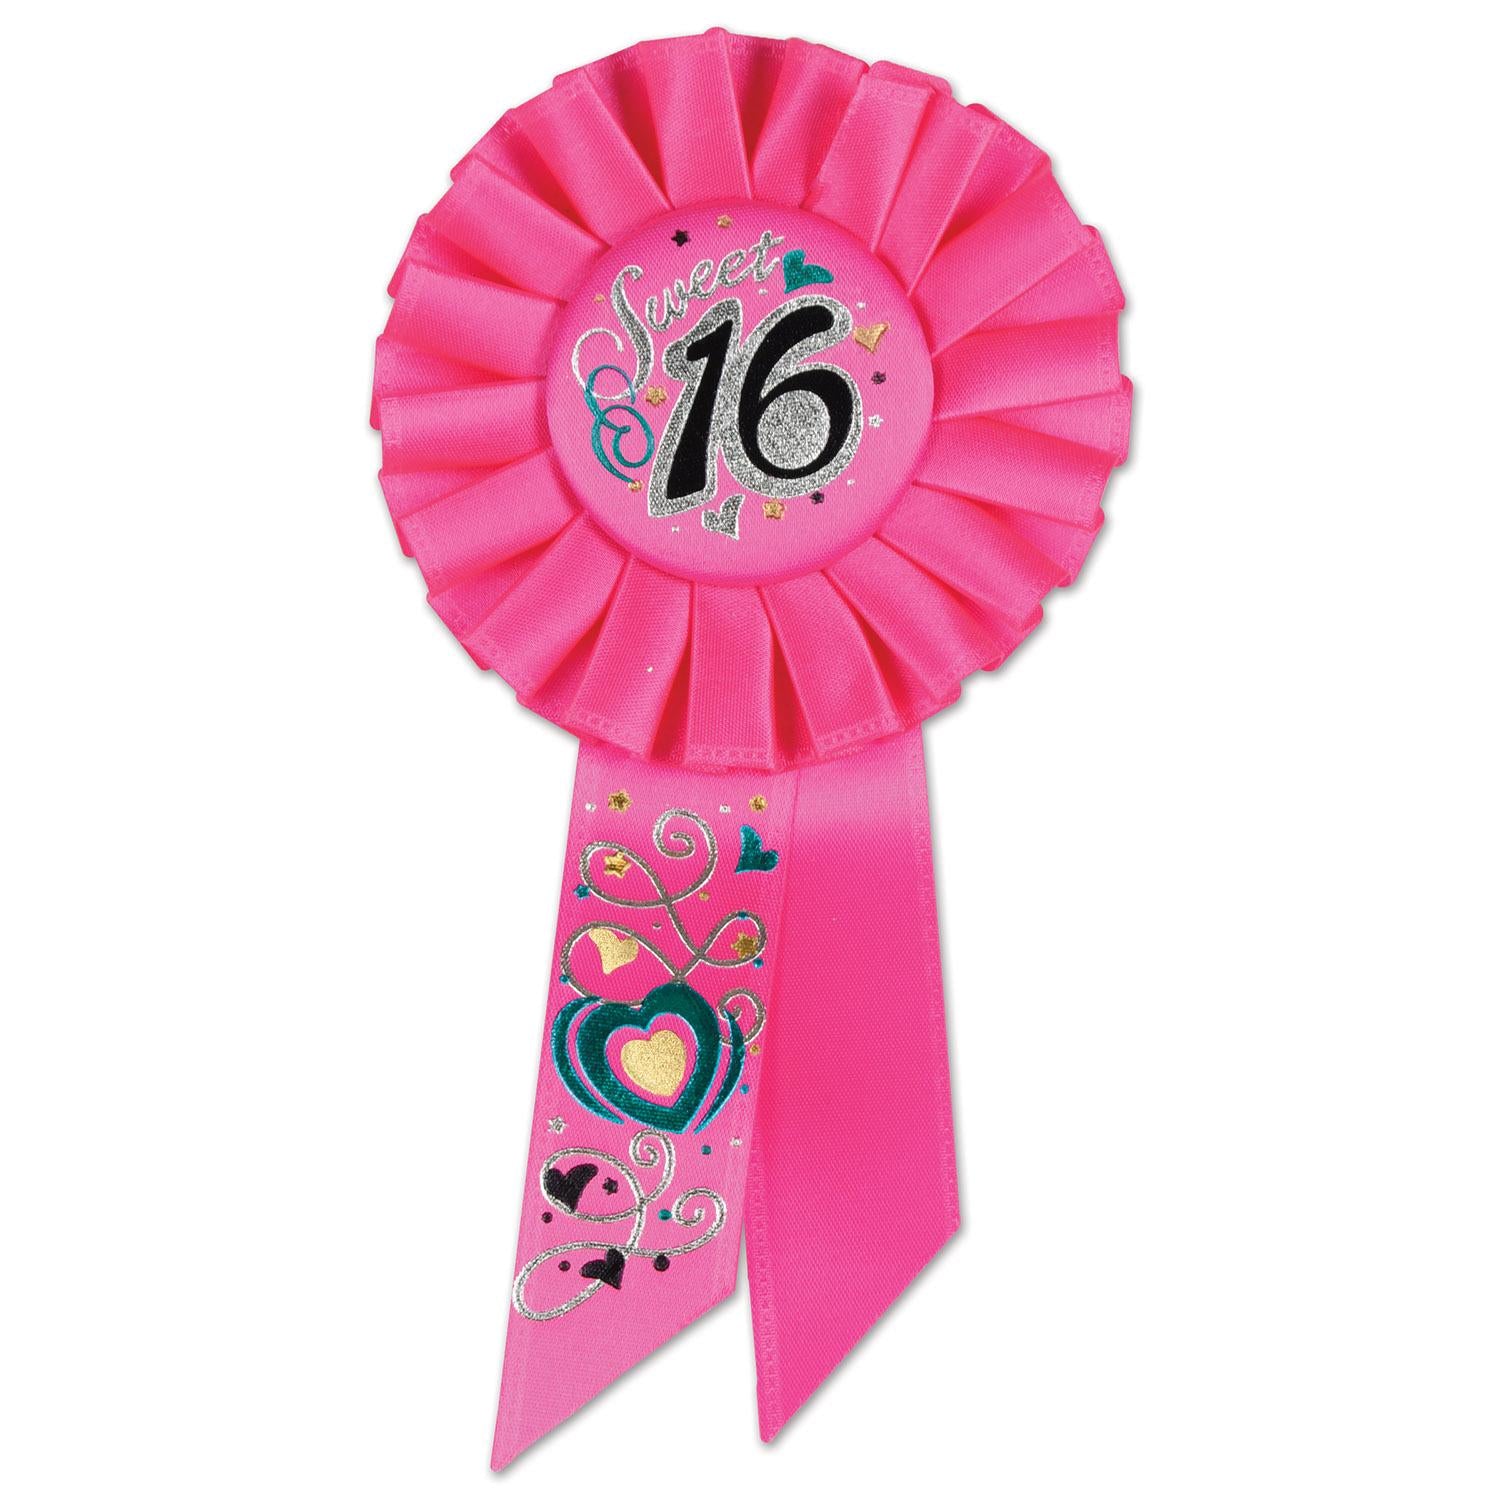 Beistle Sweet 16 Birthday Party Rosette- Pink with Hearts